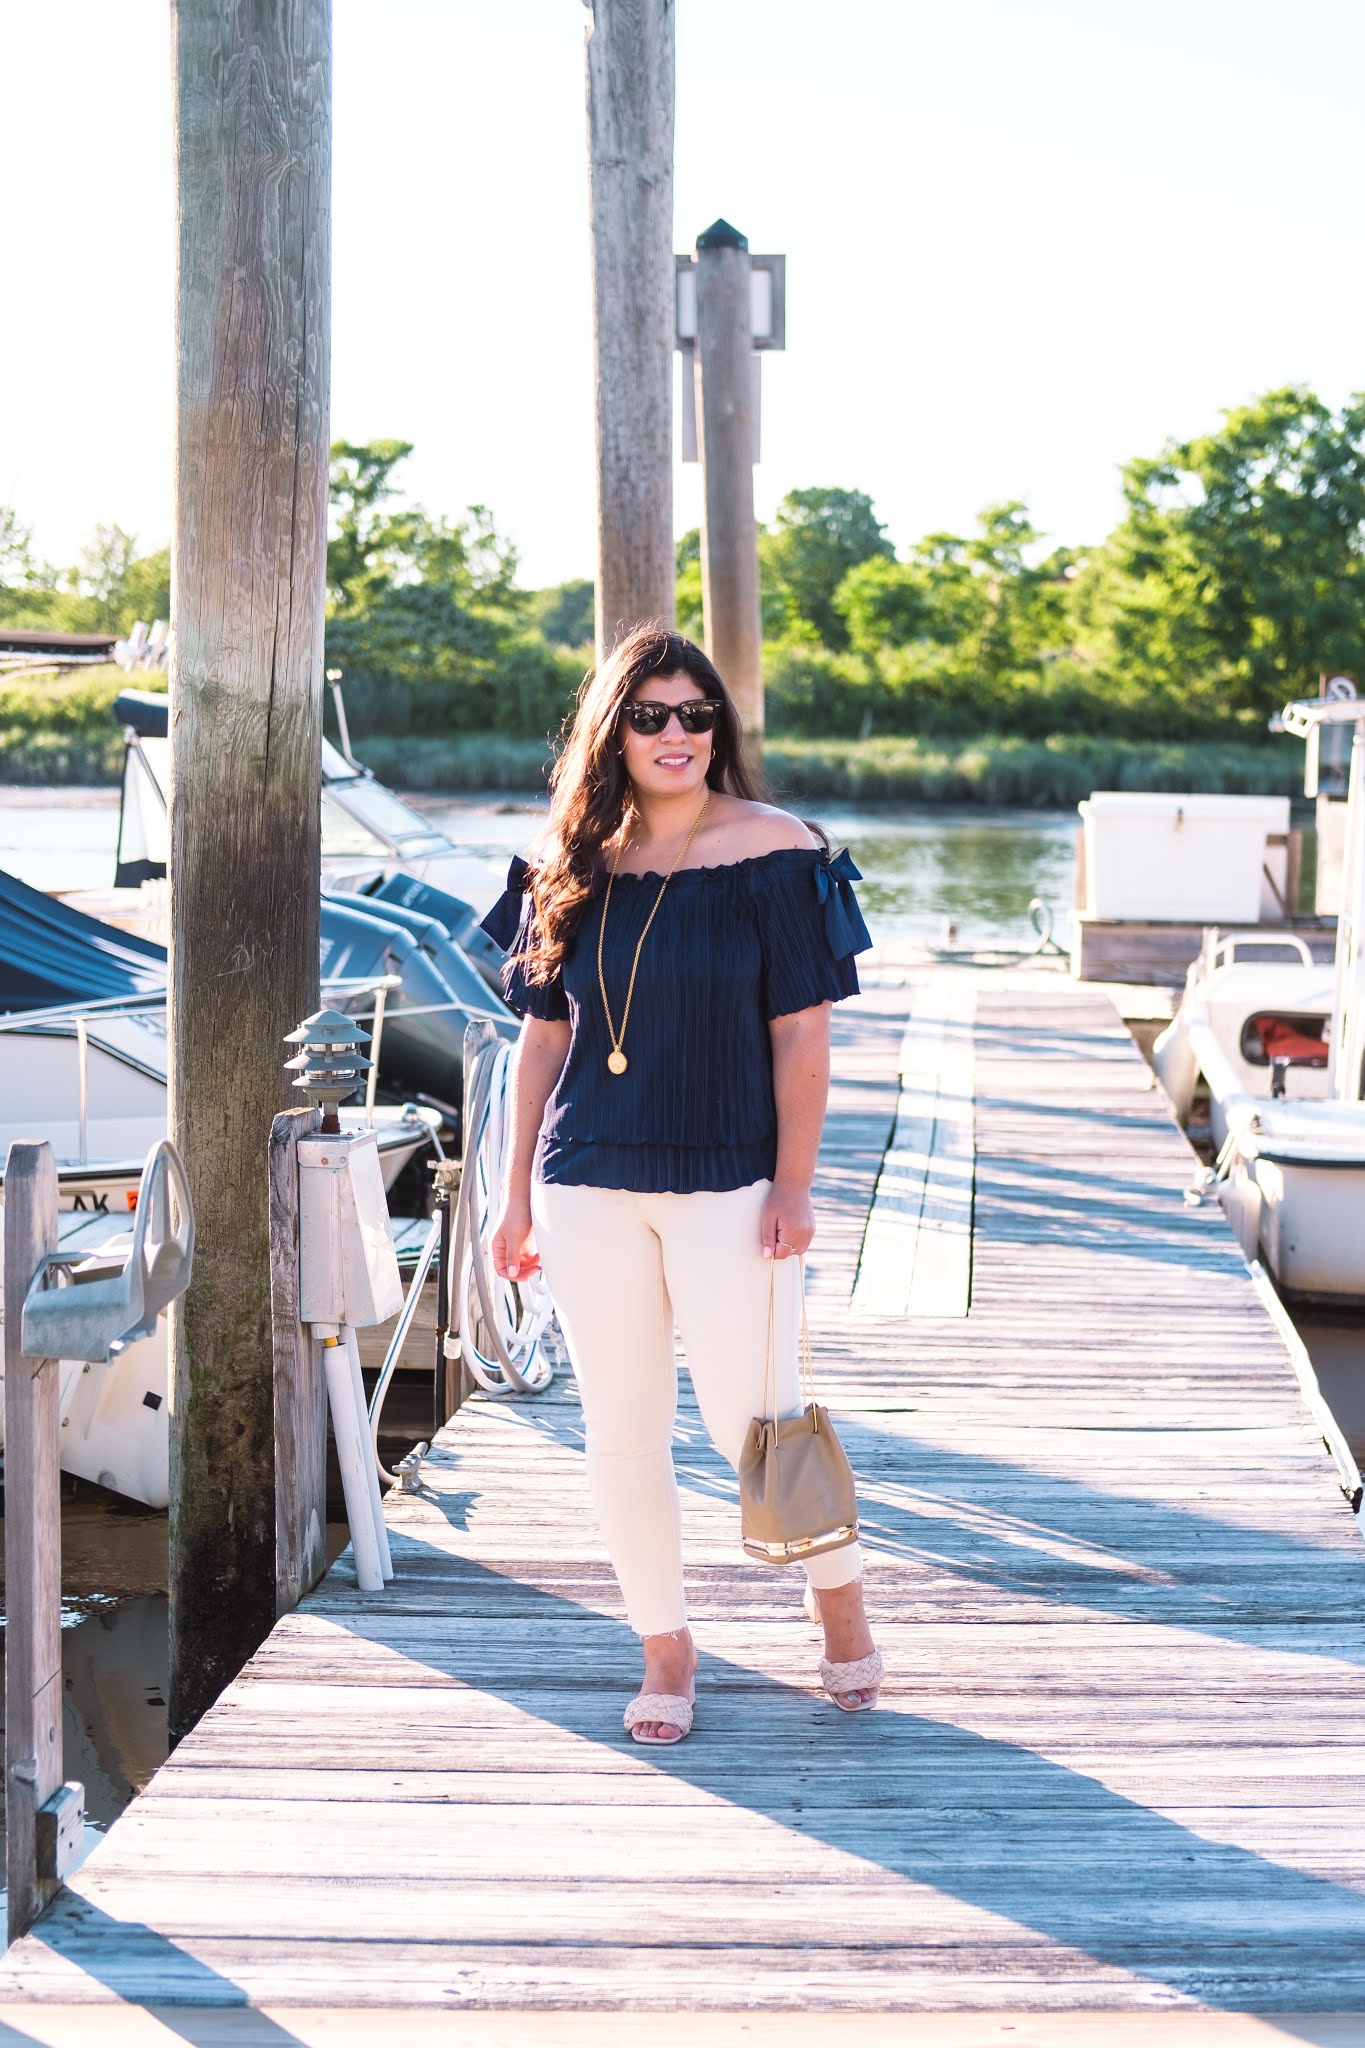 Chic on the Cheap  Connecticut based style blogger on a budget, by Lydia  Abate